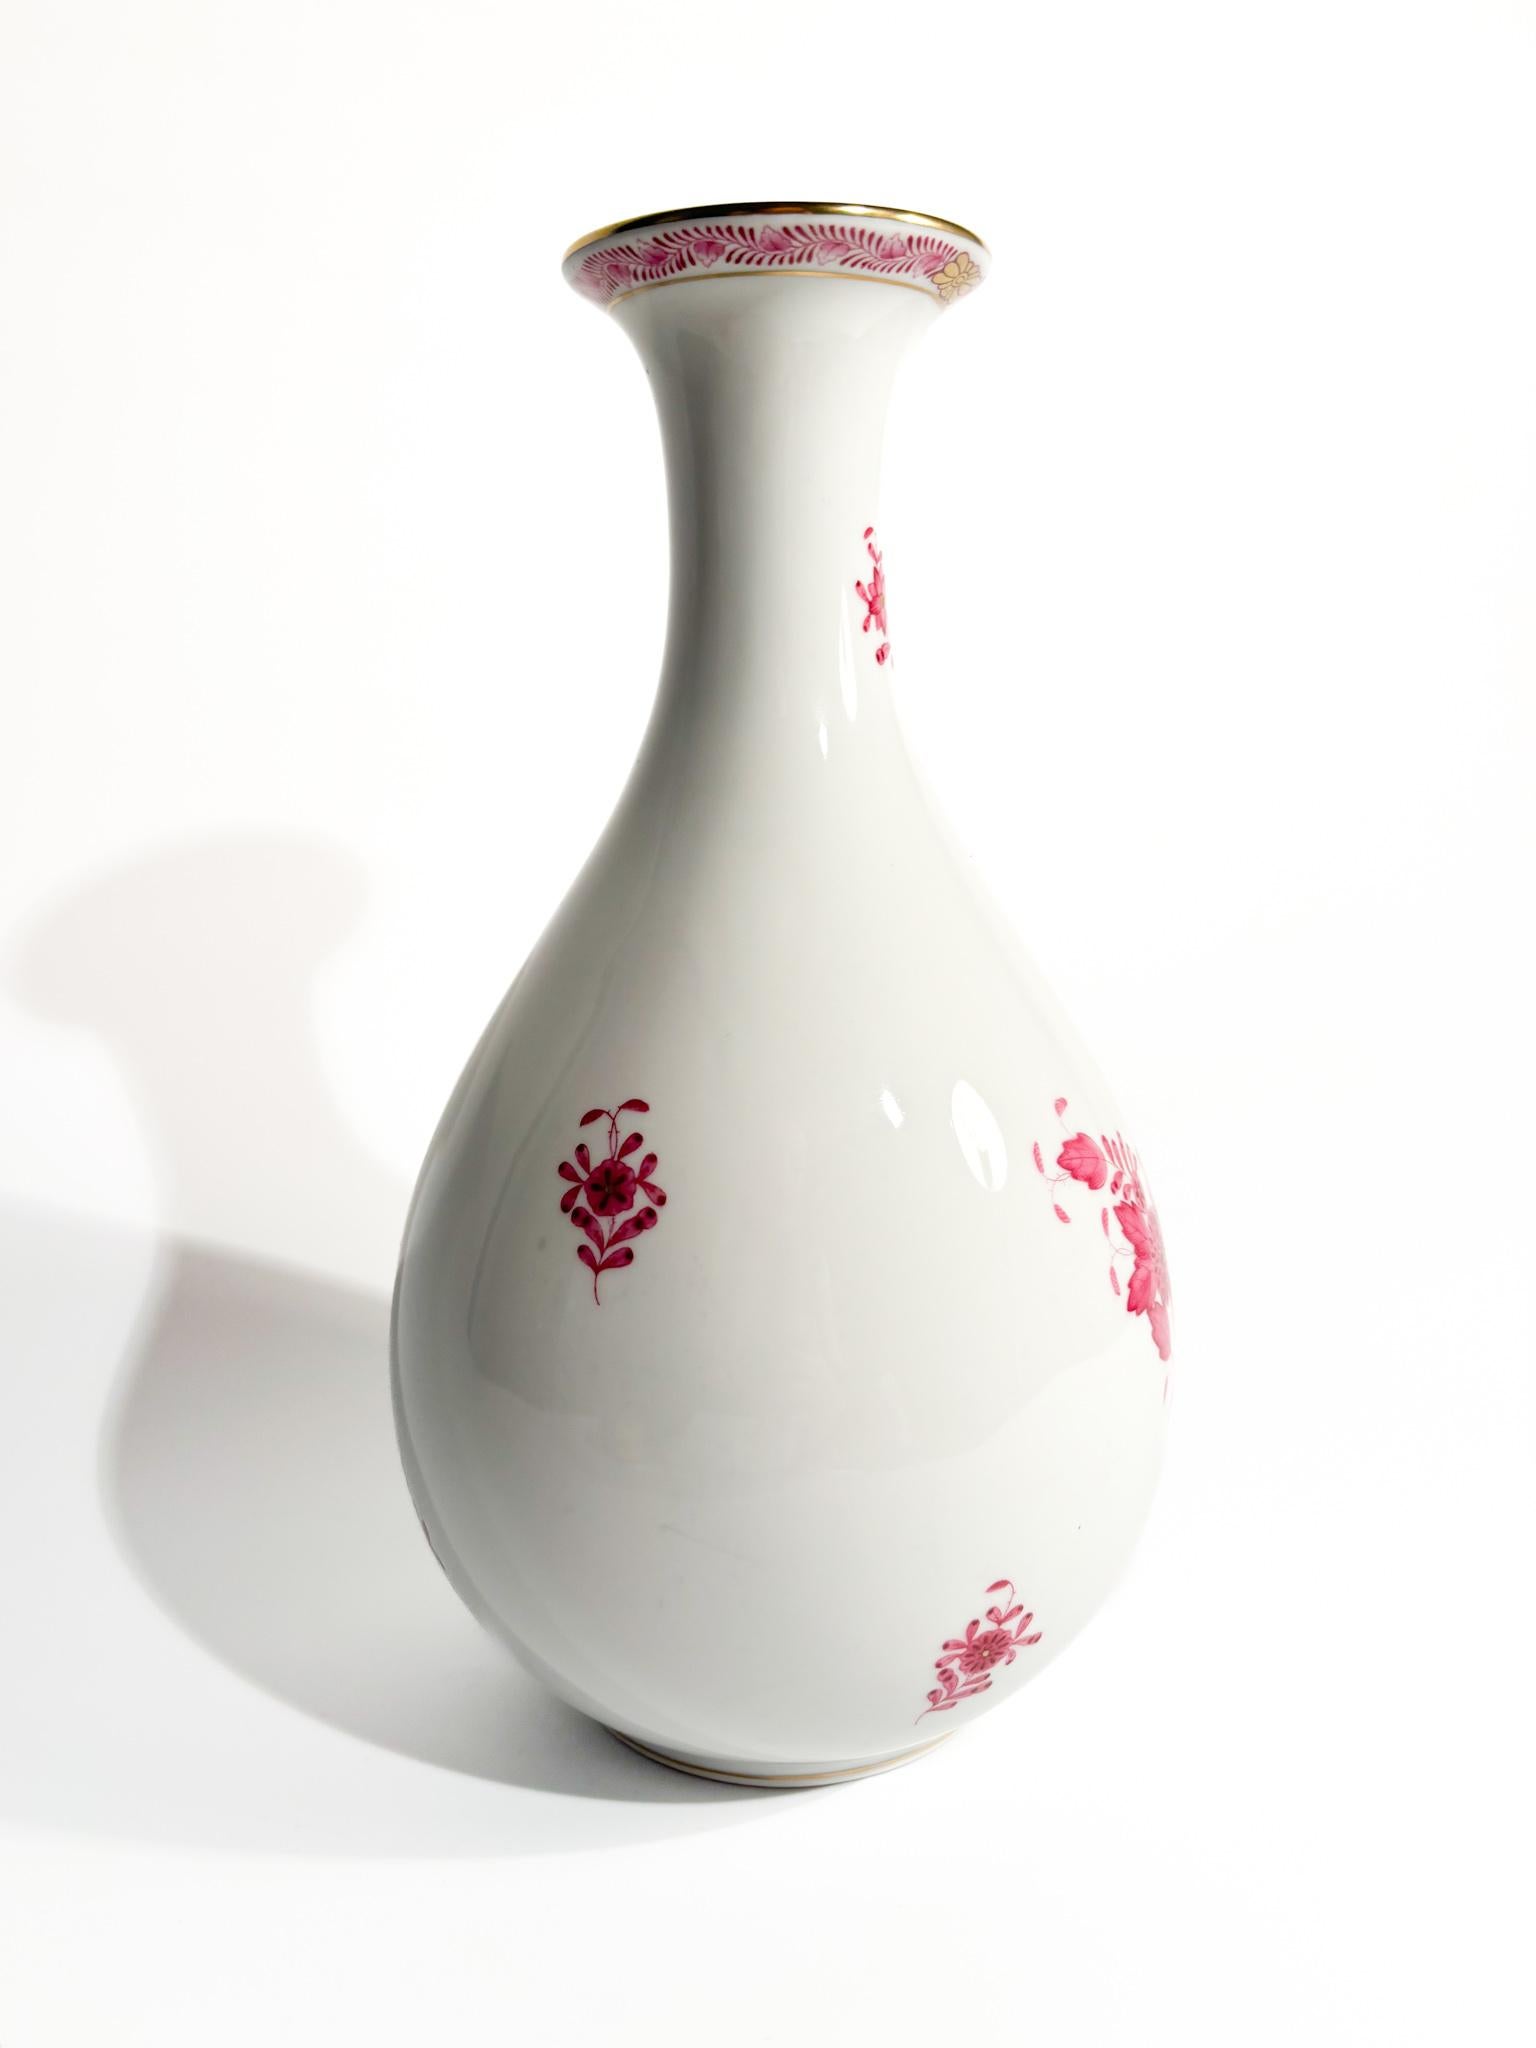 Hungarian Herend Apponyi Pink Porcelain Vase from the 1950s For Sale